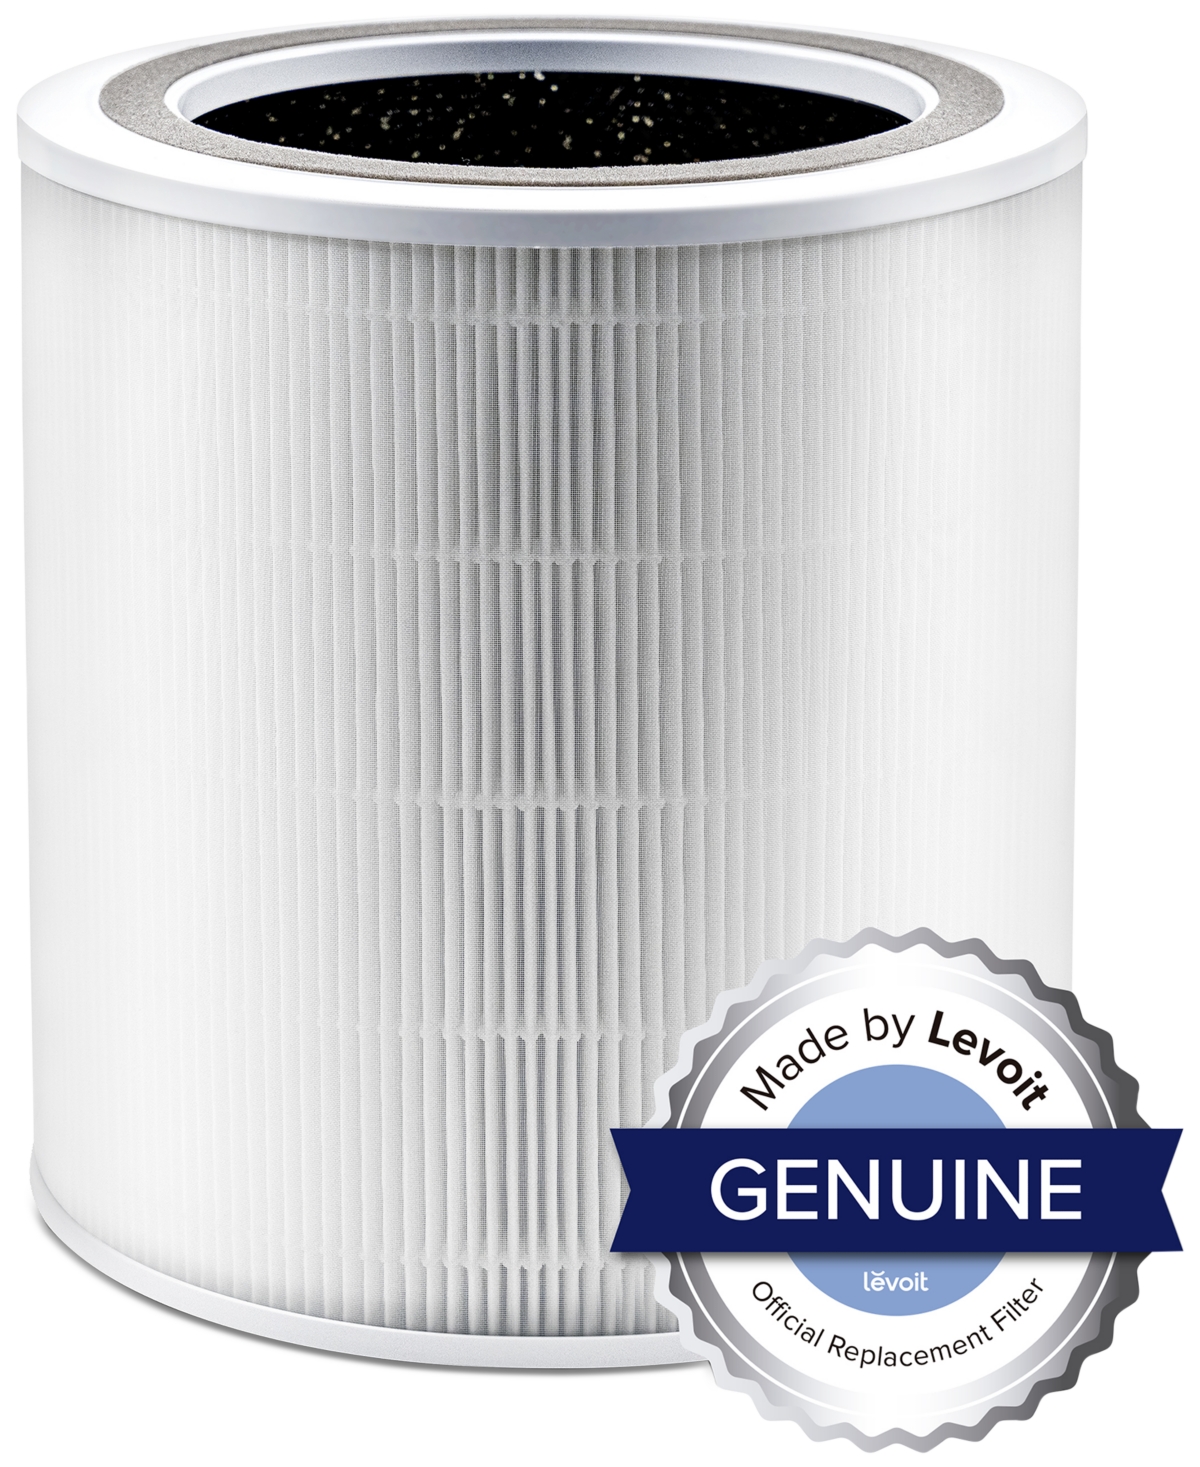 Levoit Replacement Filter For Core 400s In White